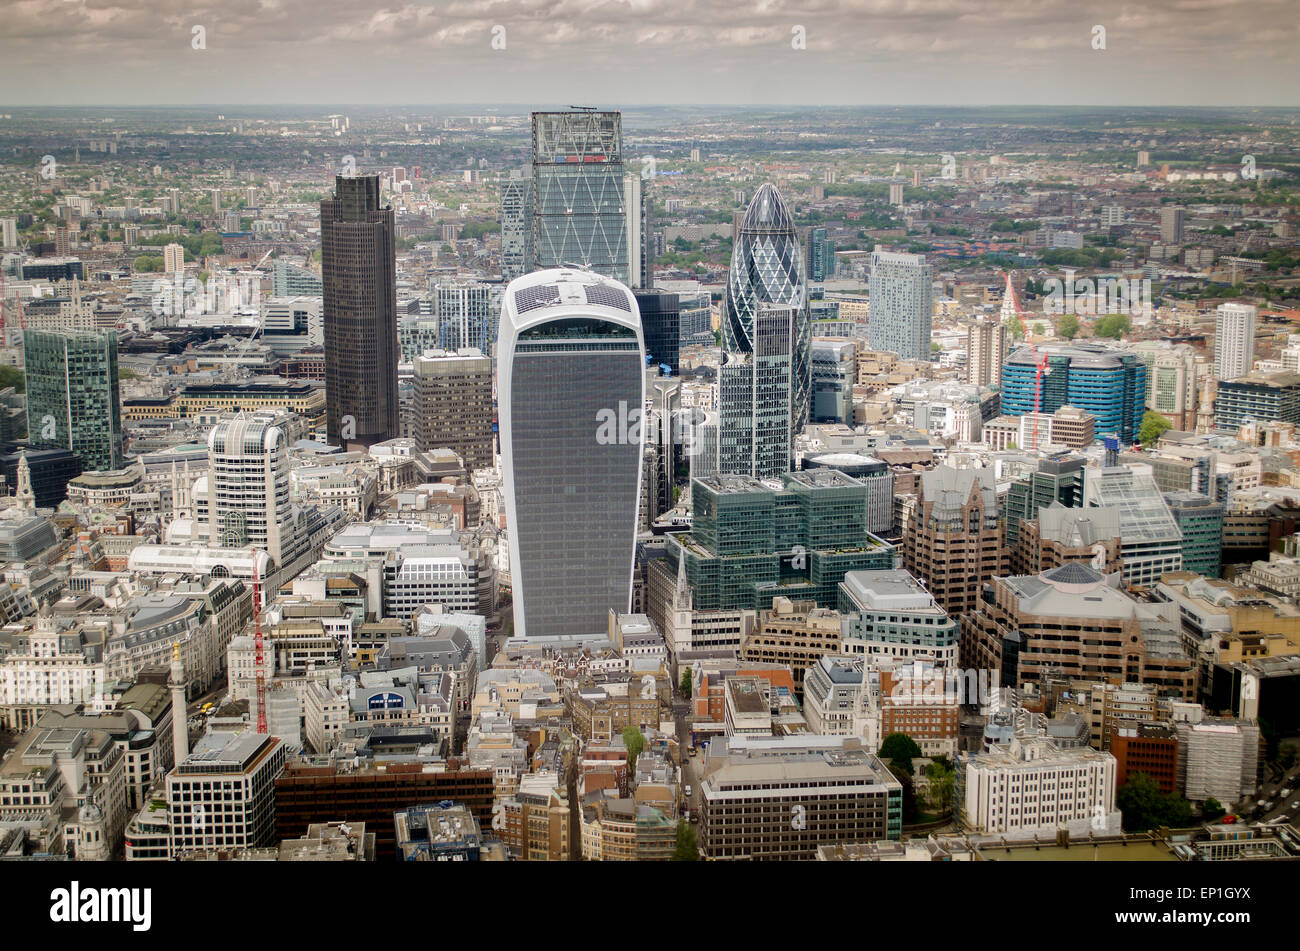 Aerial view of London city financial and banking buidings Stock Photo